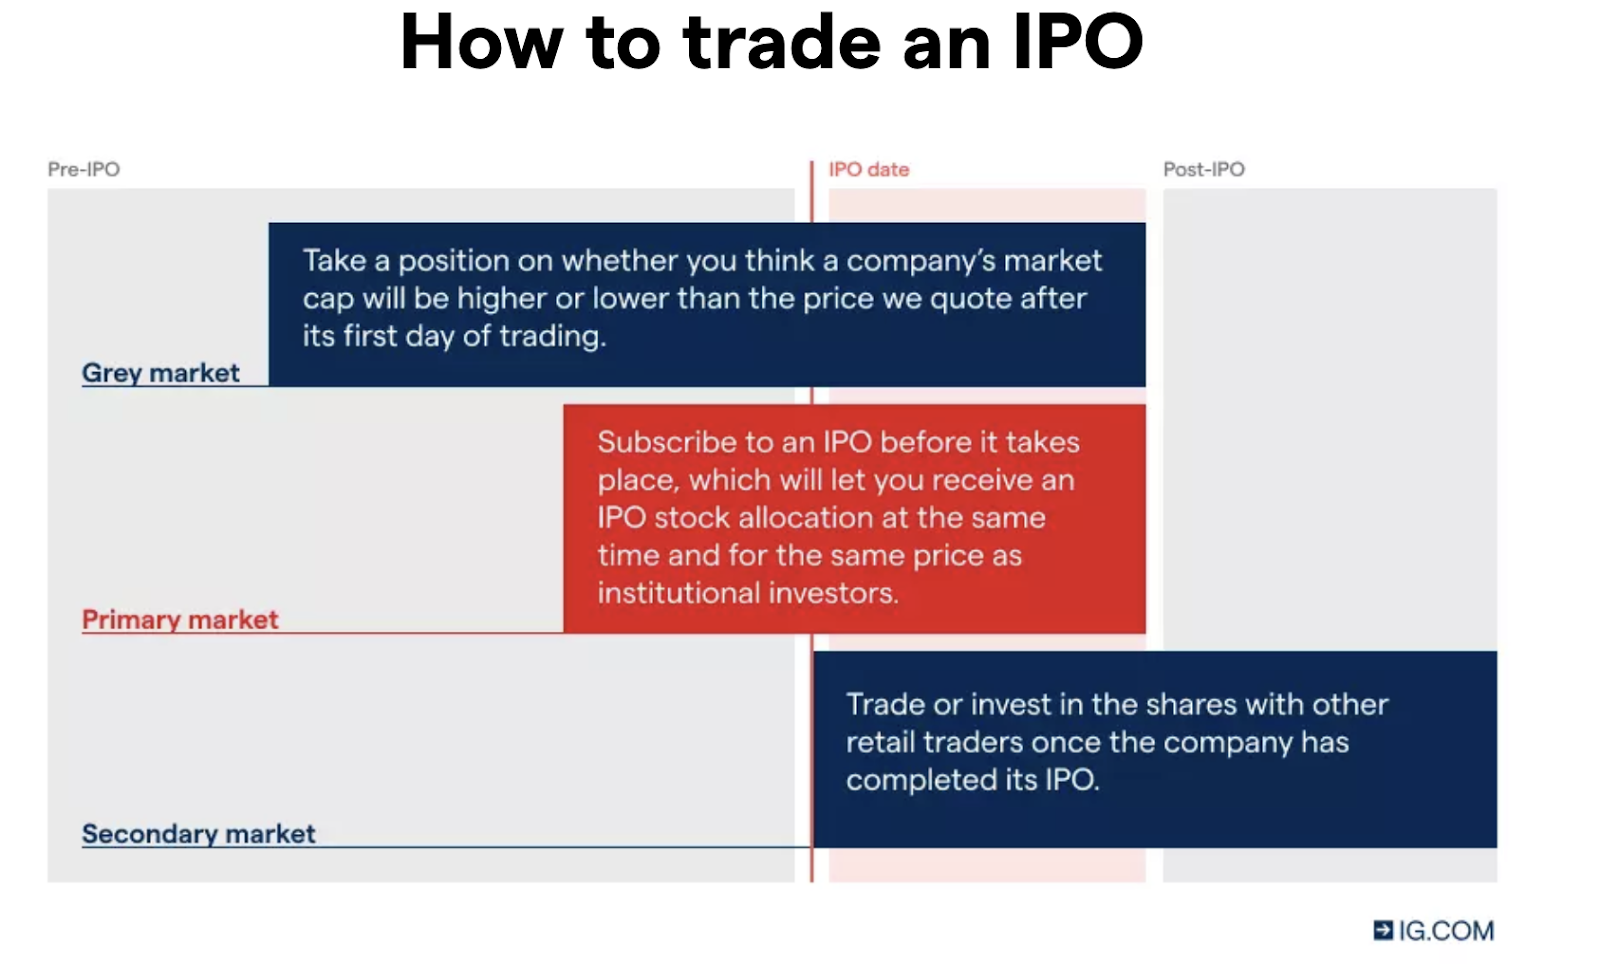 How to trade an IPO